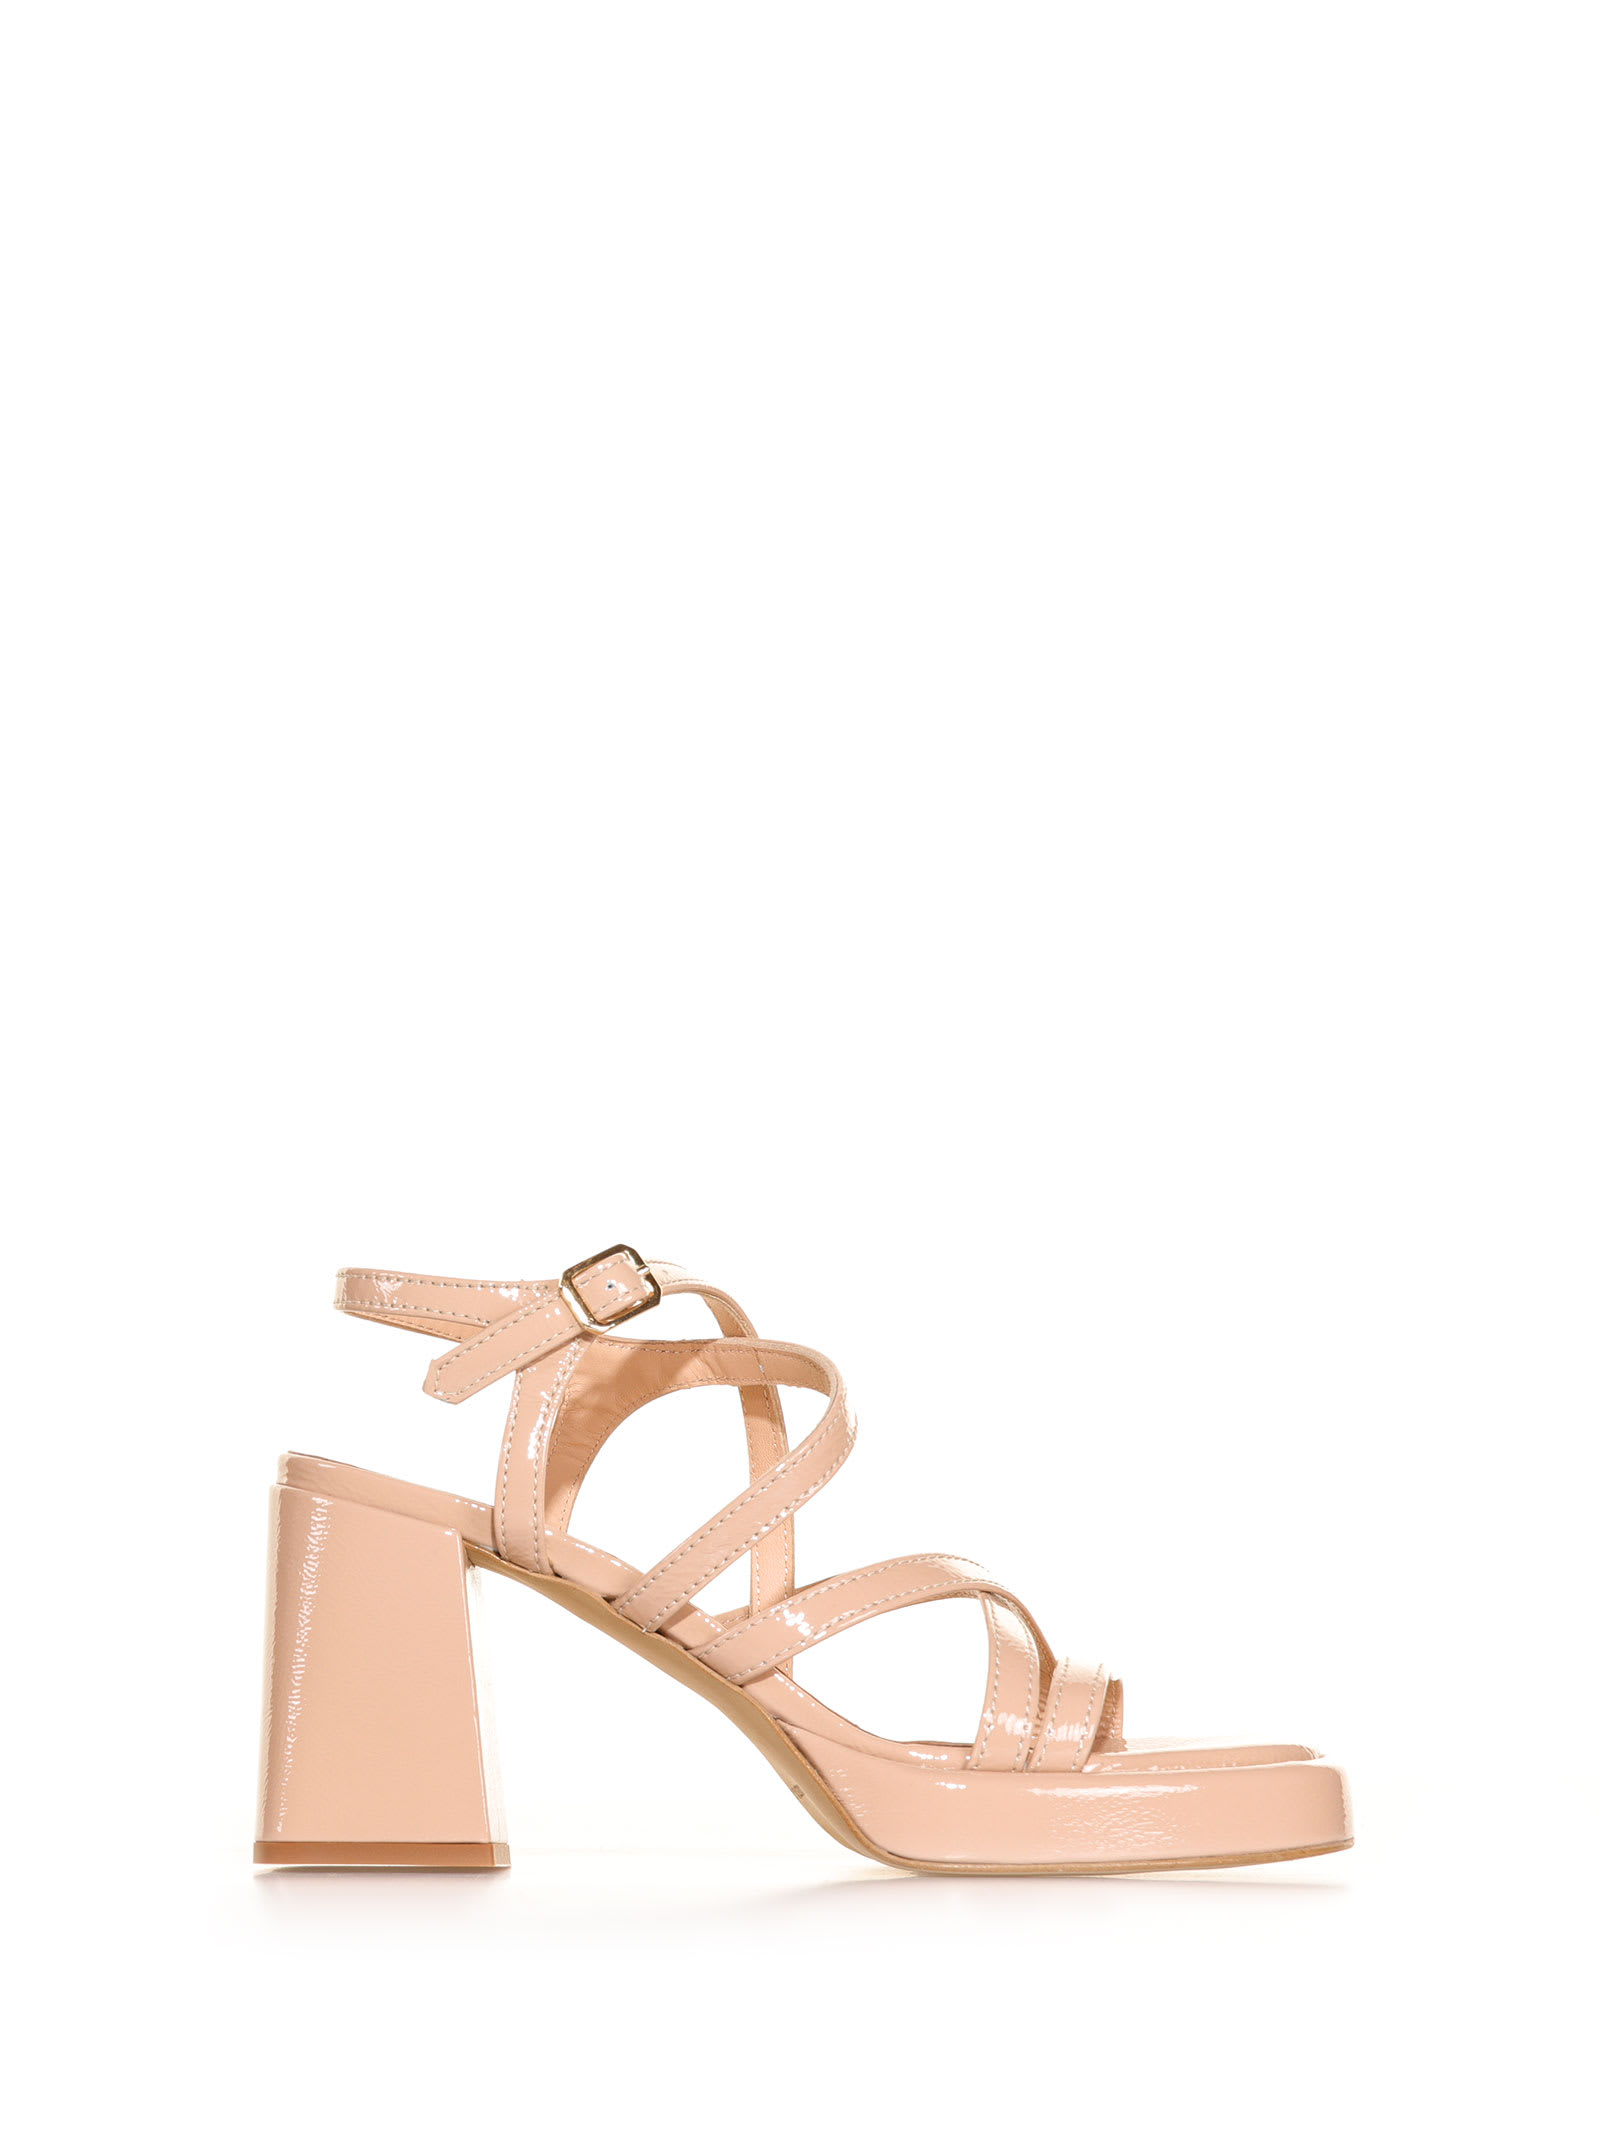 Janet & Janet Sandal With Strap And Woven Straps